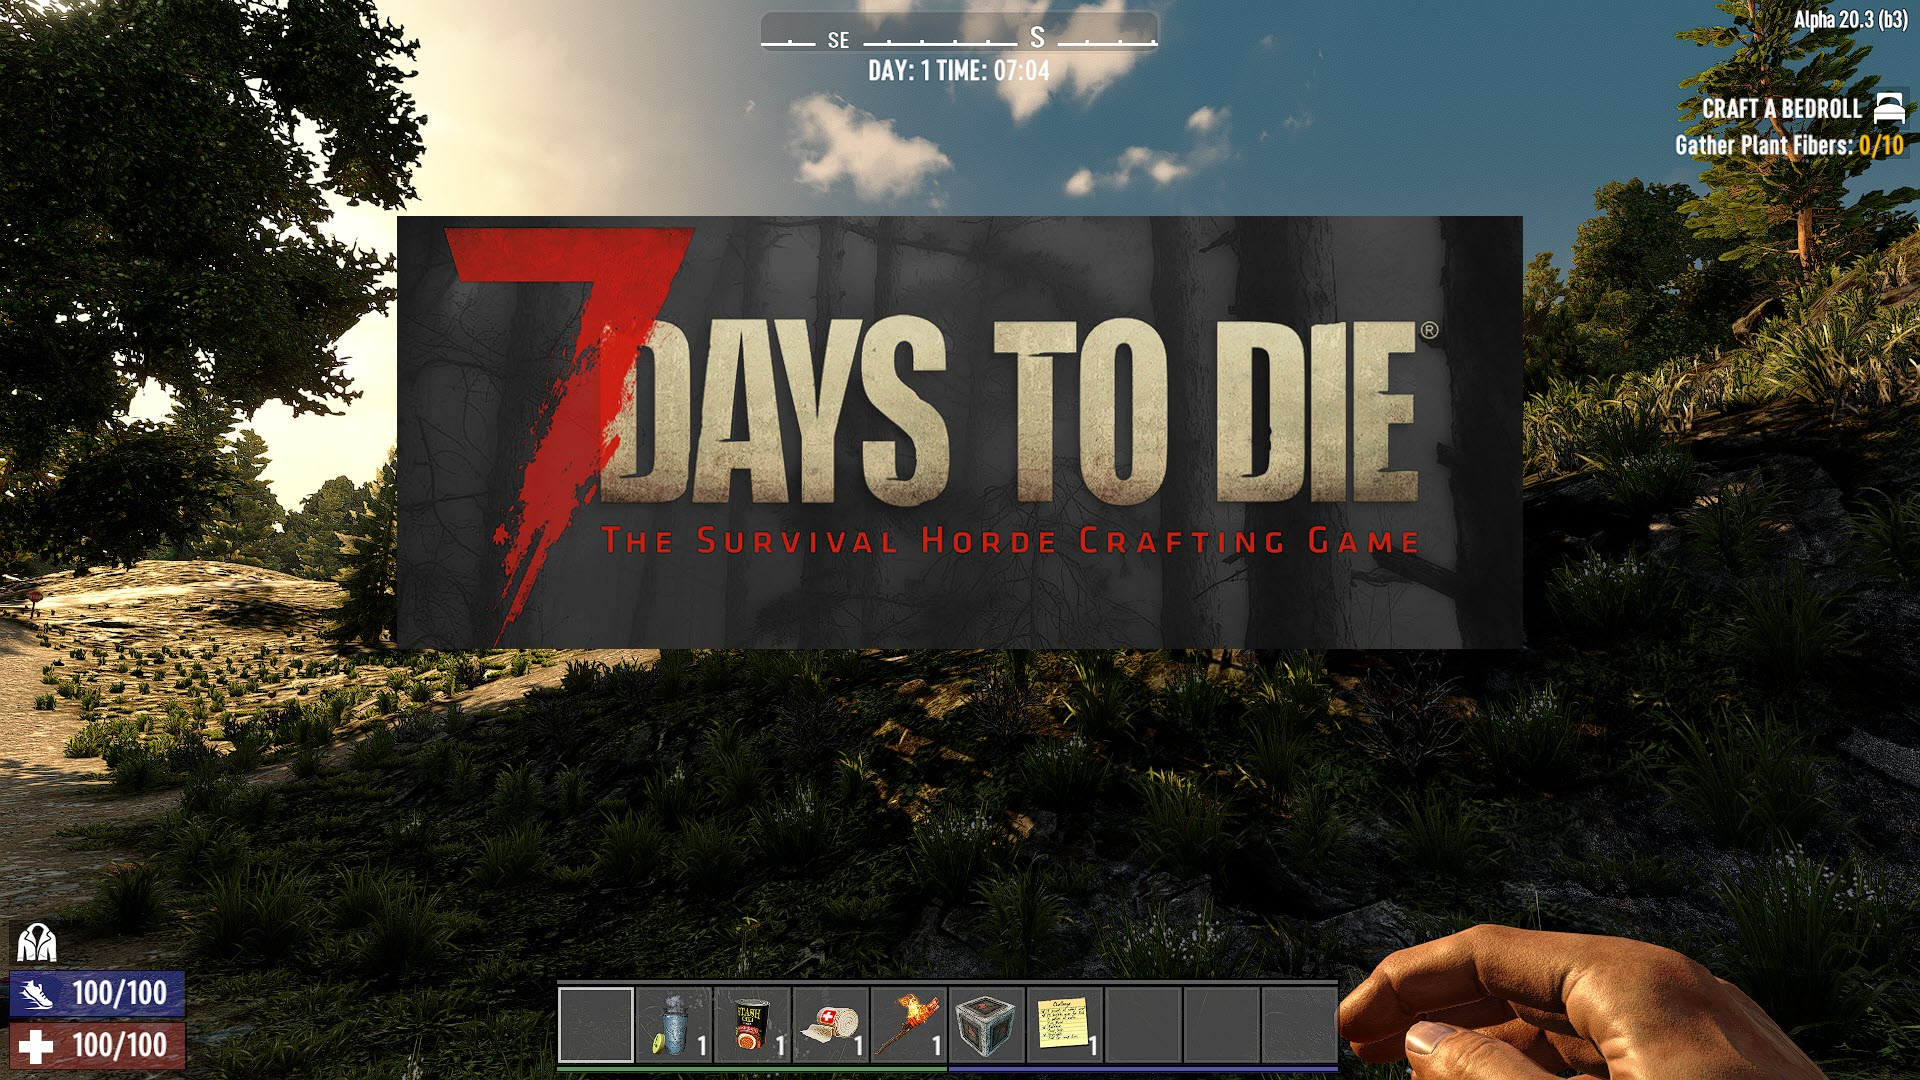 Why does 7 Days To Die keep freezing and closing?